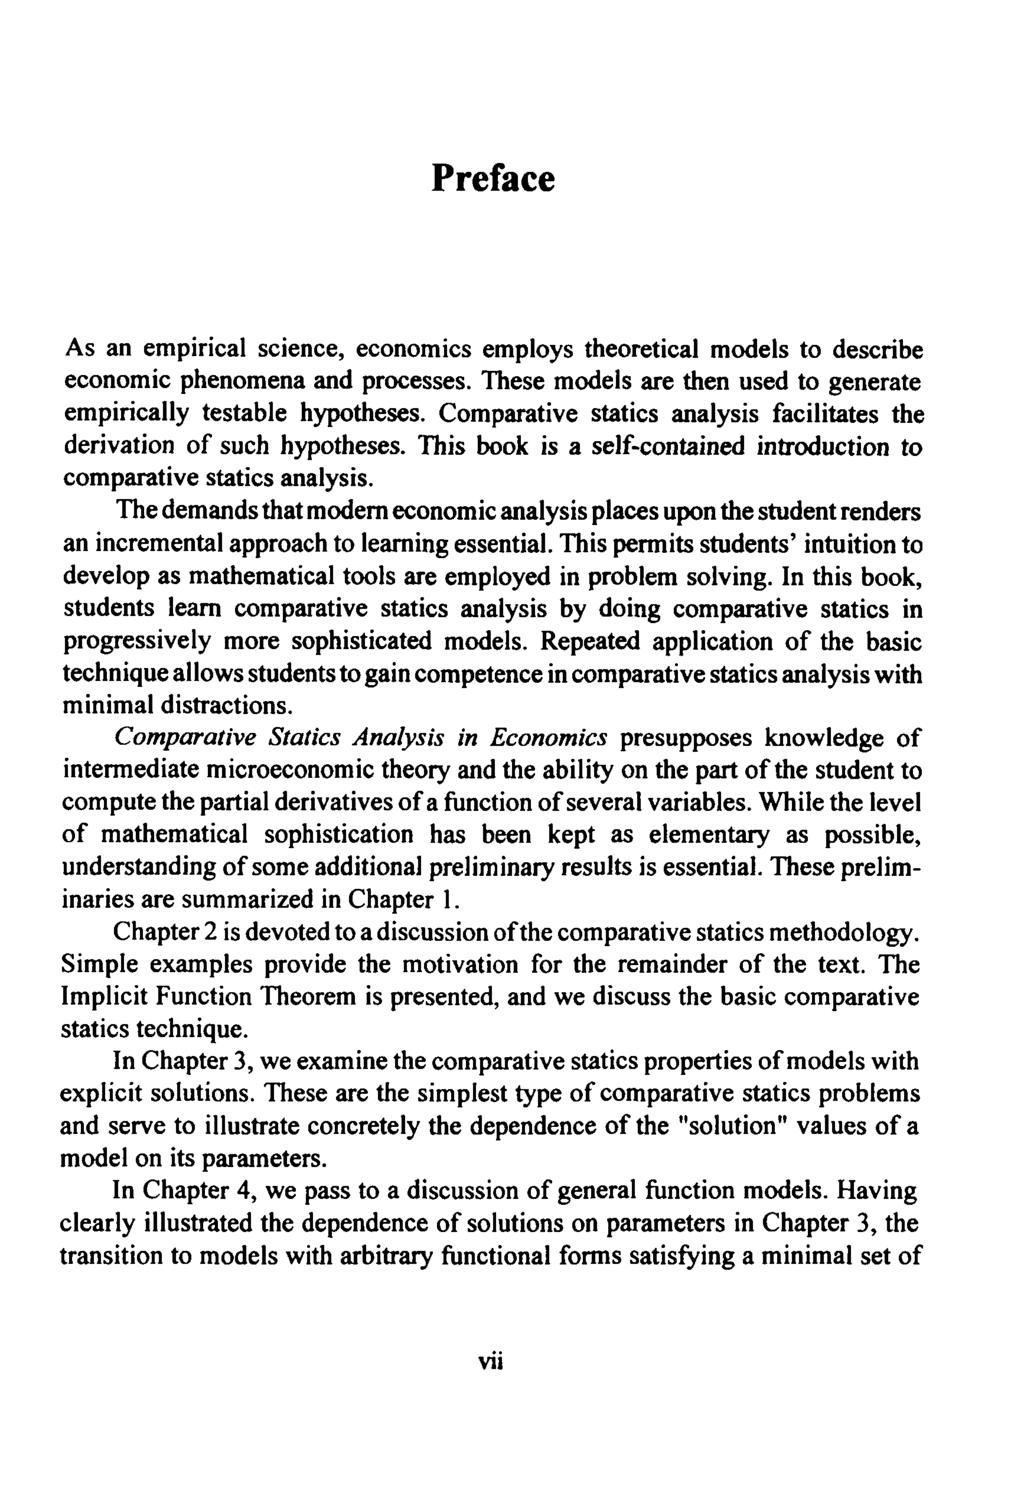 Preface As an empirical science, economics employs theoretical models to describe economic phenomena and processes. These models are then used to generate empirically testable hypotheses.